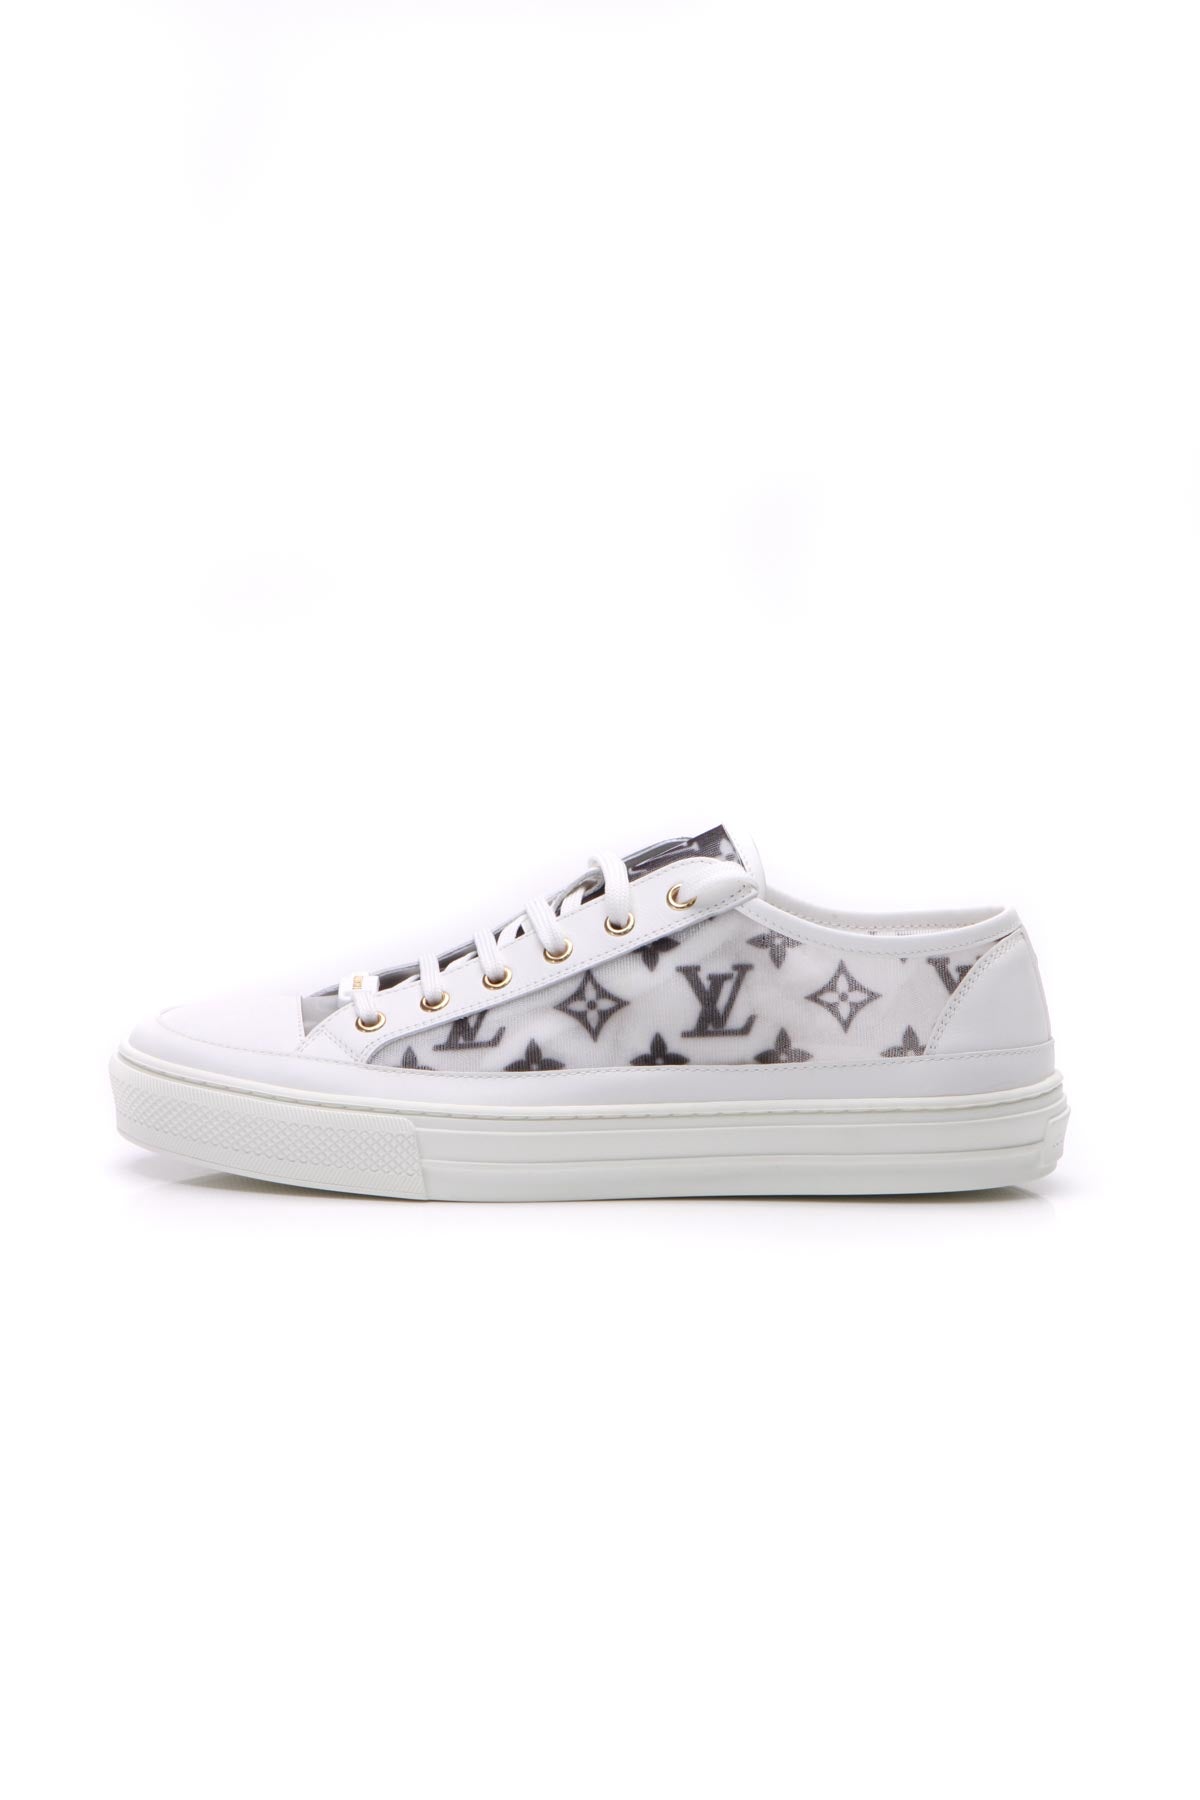 Louis Vuitton White Mesh And Leather Run Away Low Top Sneakers Size 38.5 Louis  Vuitton